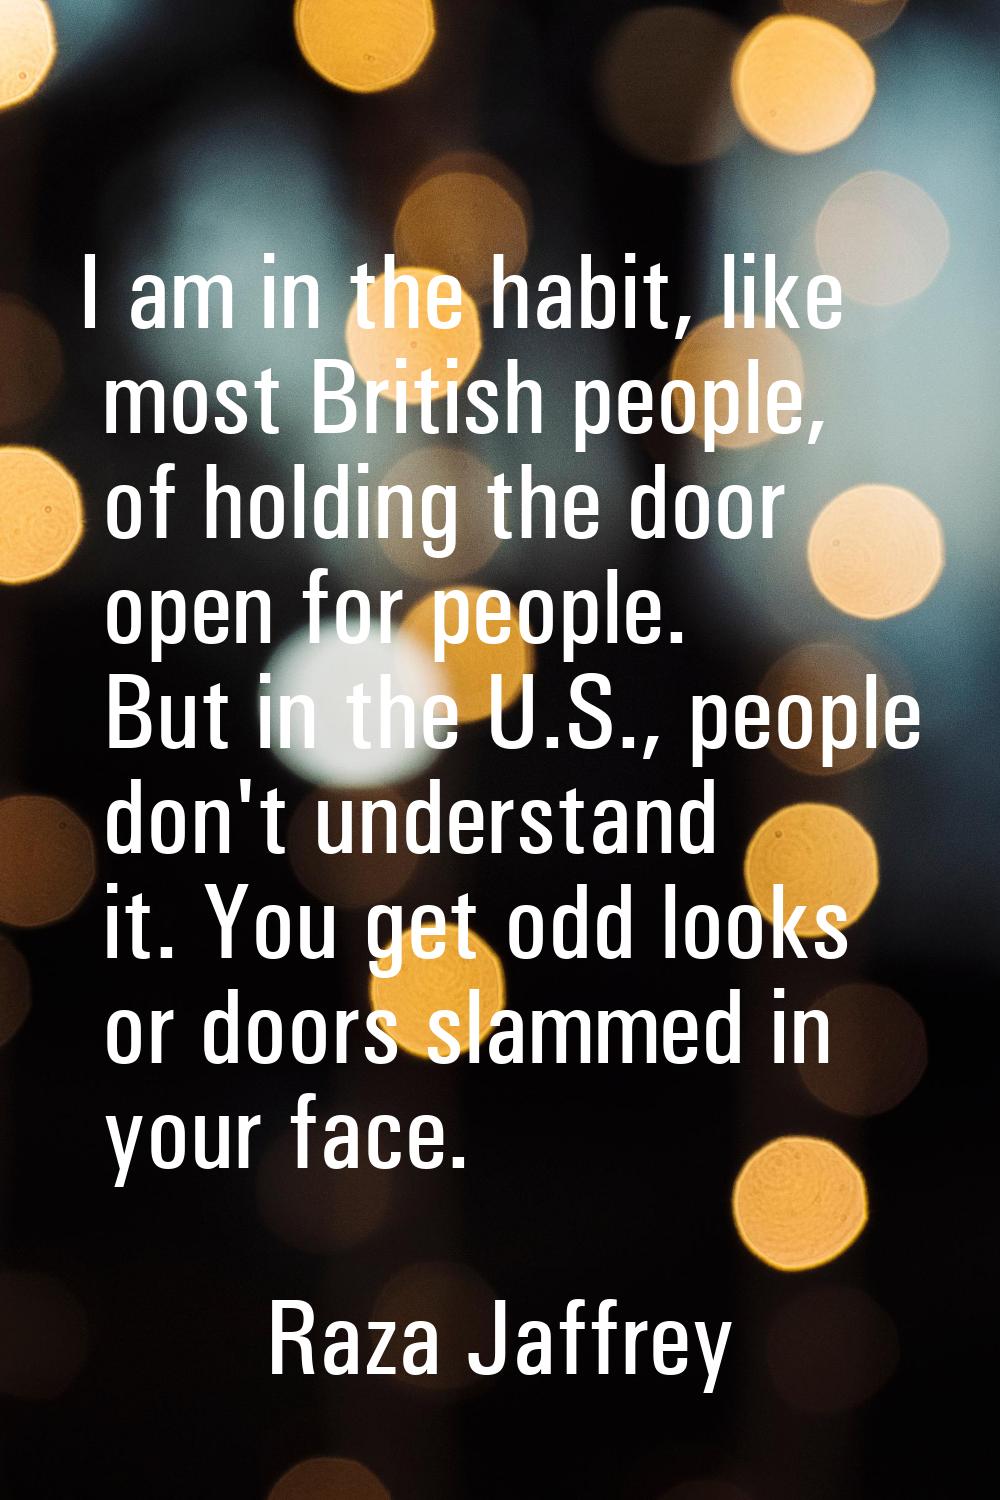 I am in the habit, like most British people, of holding the door open for people. But in the U.S., 